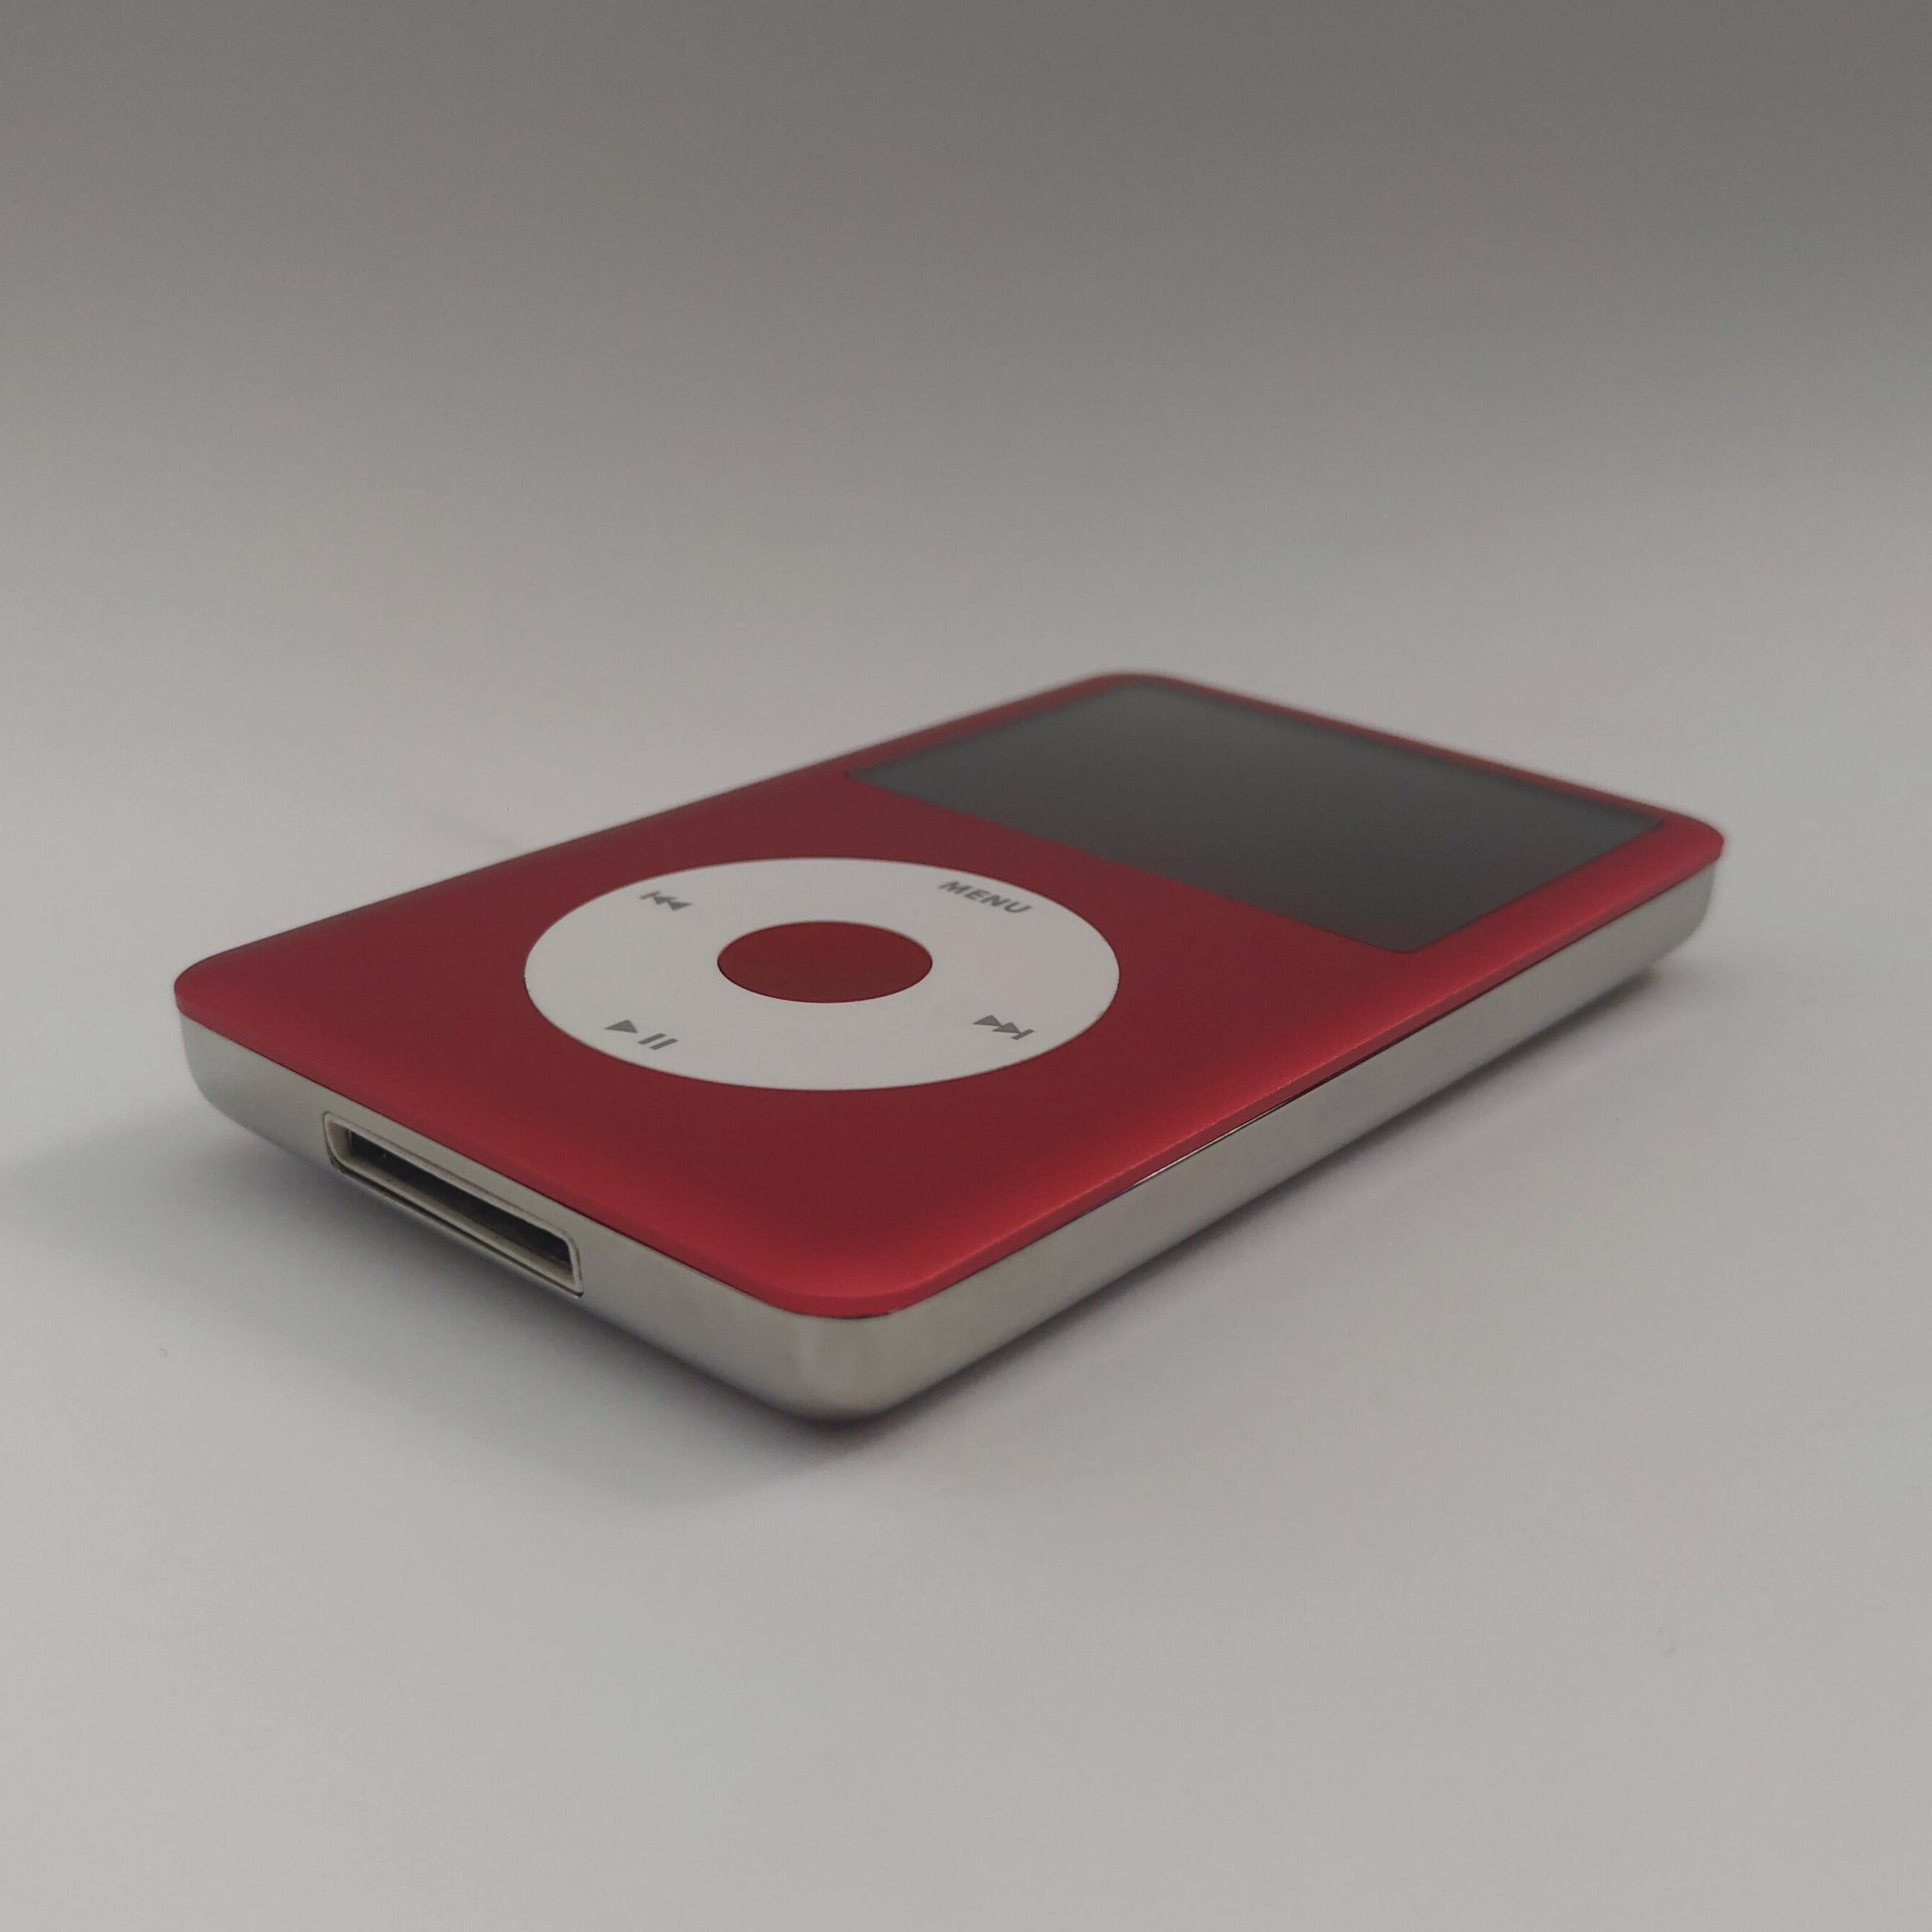 iPod classic - Red and White | Flash Storage and Extended Battery